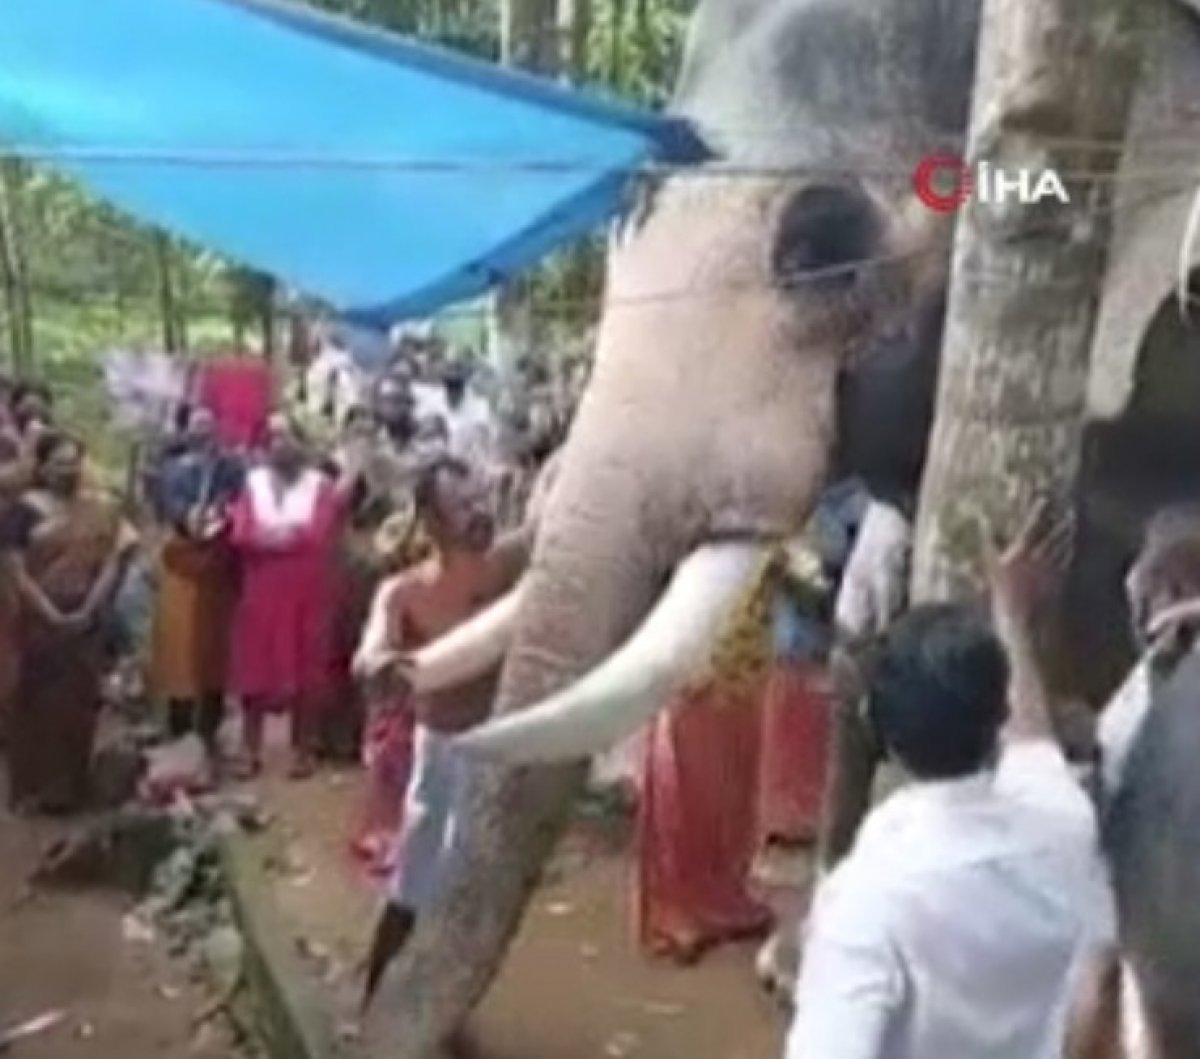 Elephant Saying Goodbye to Its Owner in India #3